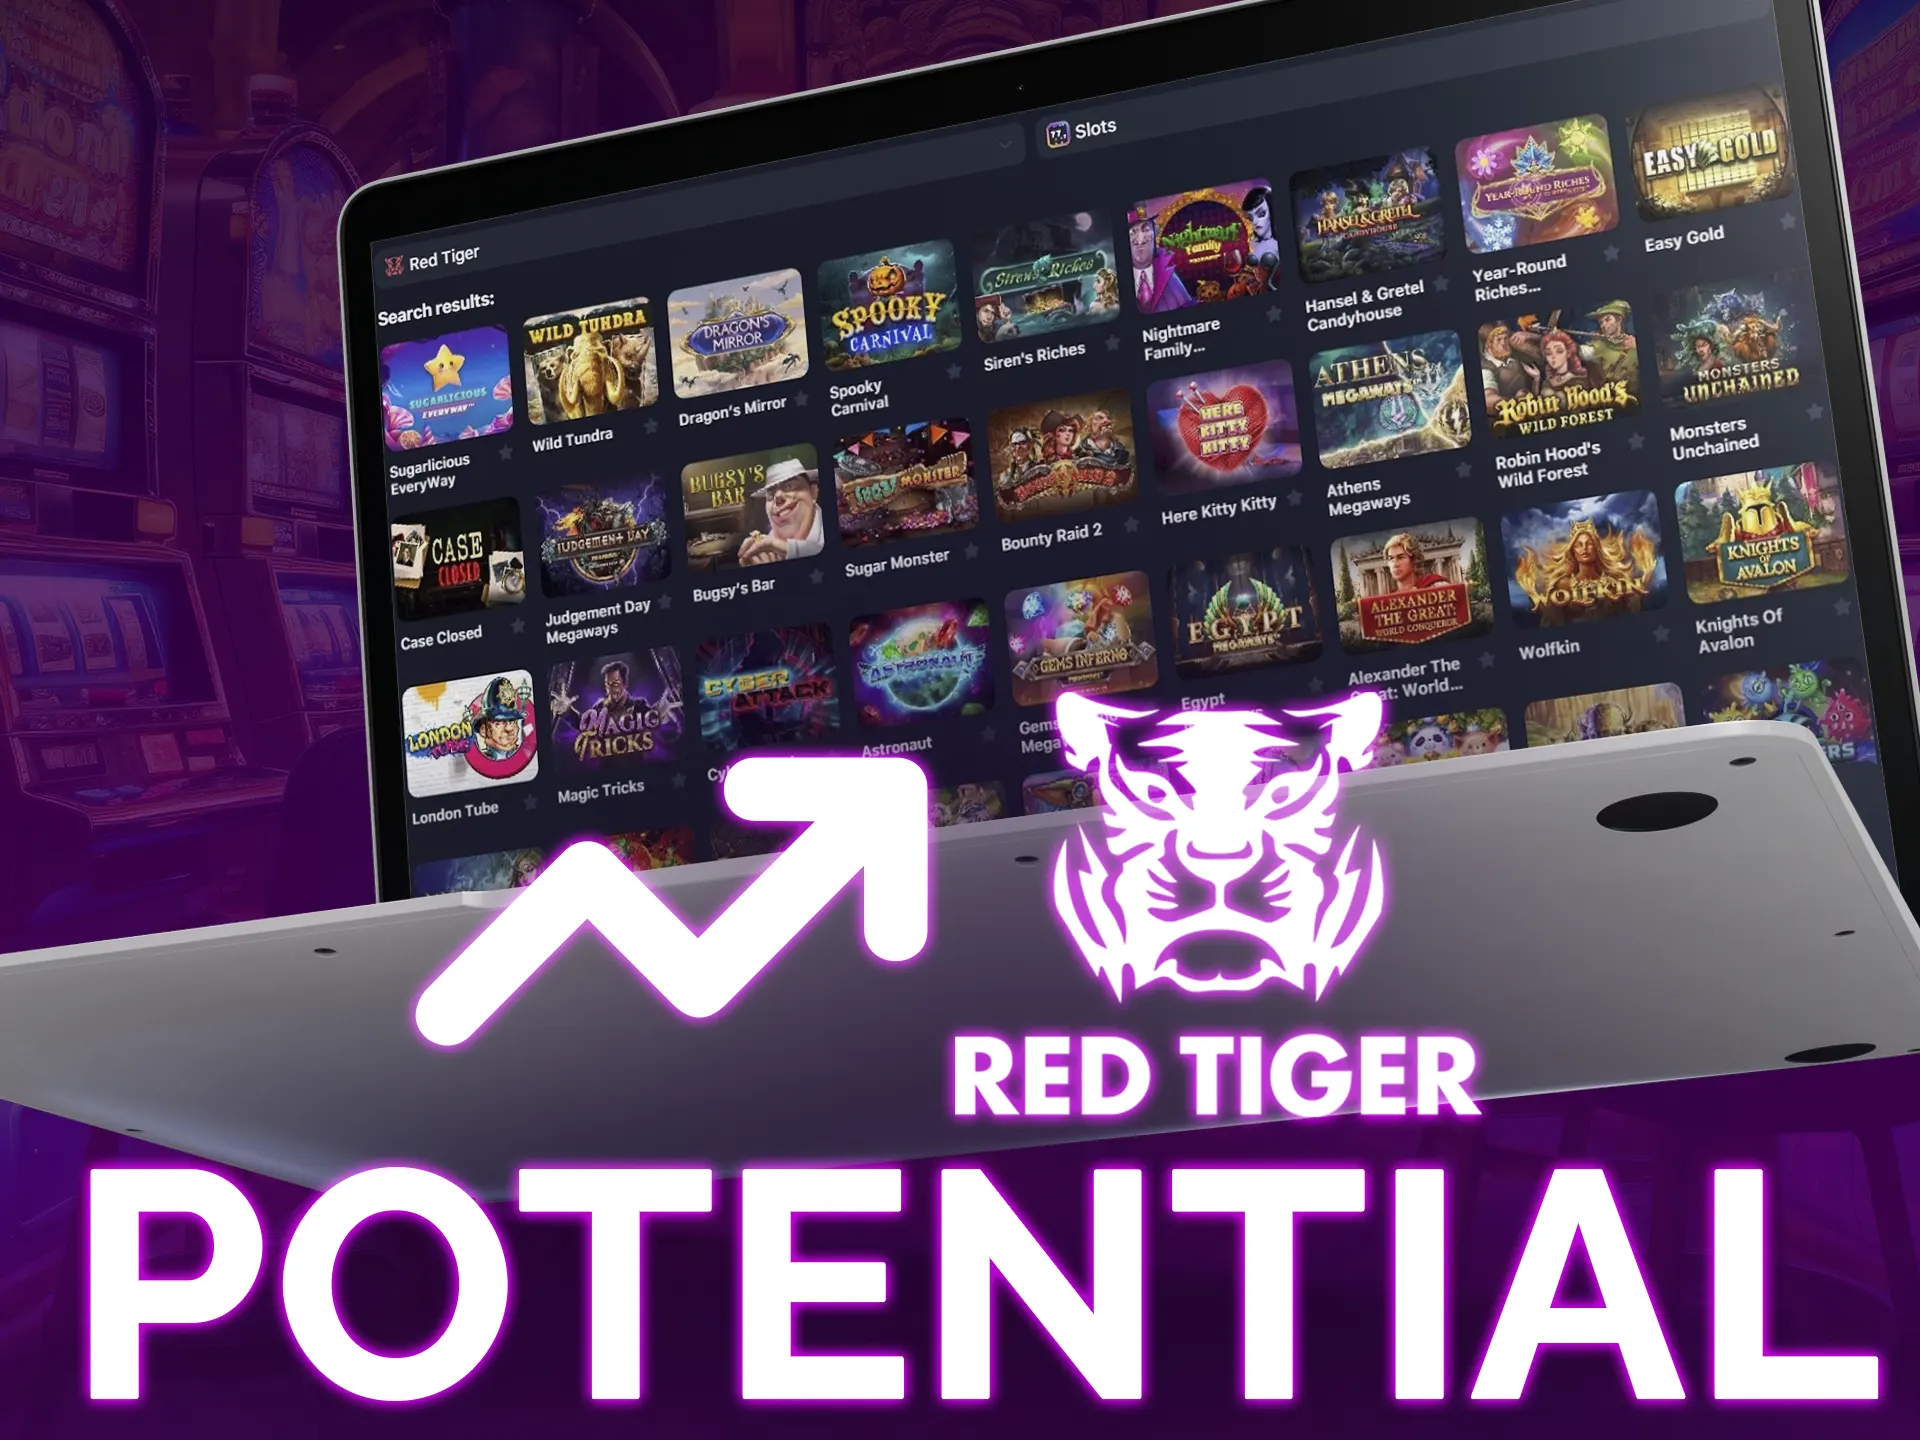 Big win potential in Red Tiger's high-dispersion slots like Gonzo's Quest Megaways, Piggy Riches Megaways, and Dynamite Riches.